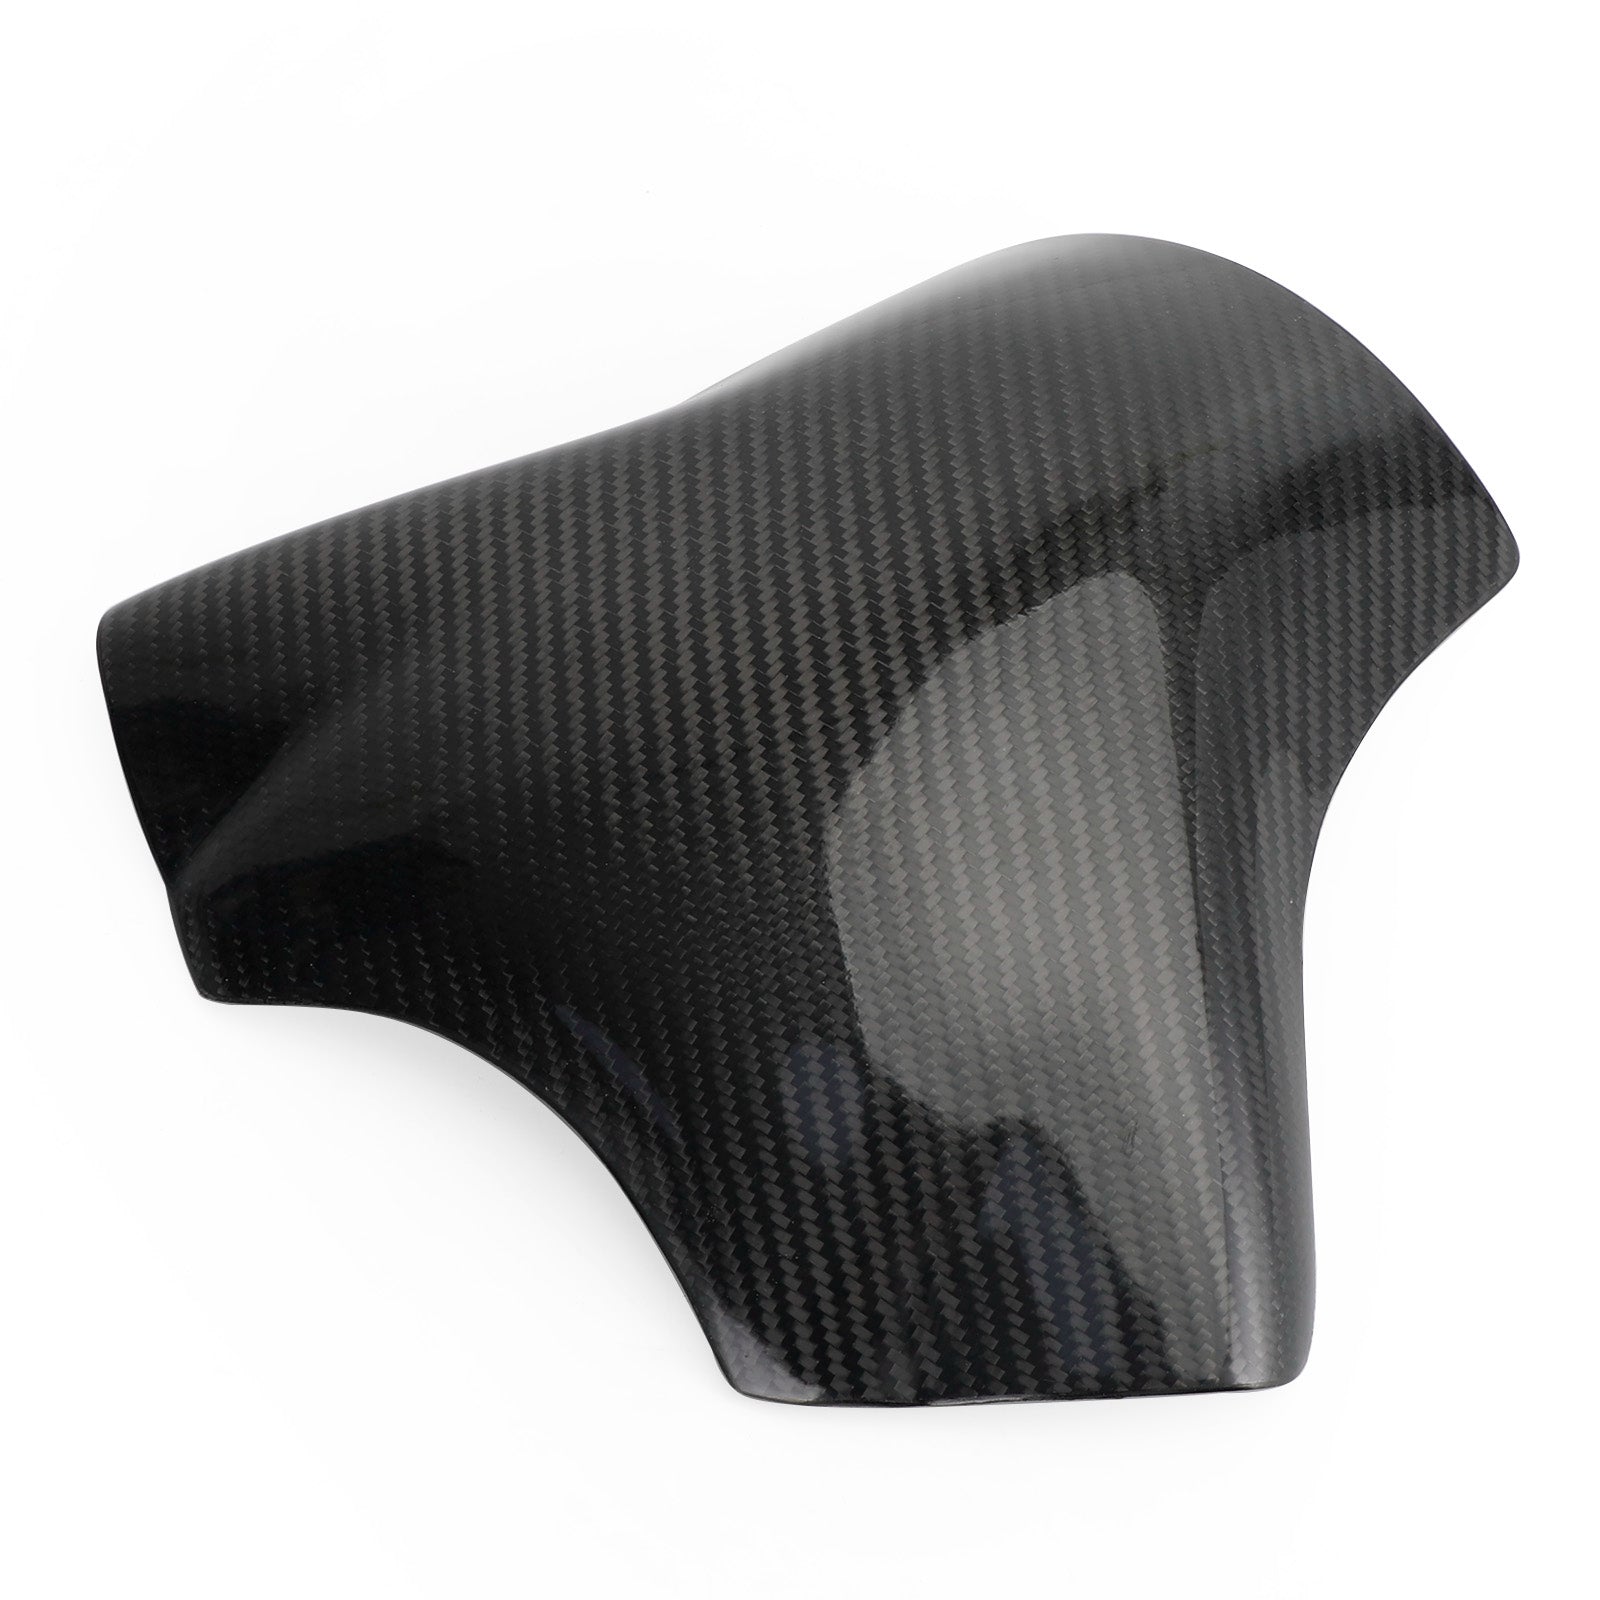 Gas Tank Cover Panel Fairing Protector For Yamaha YZF-R1 2004-2006 Carbon